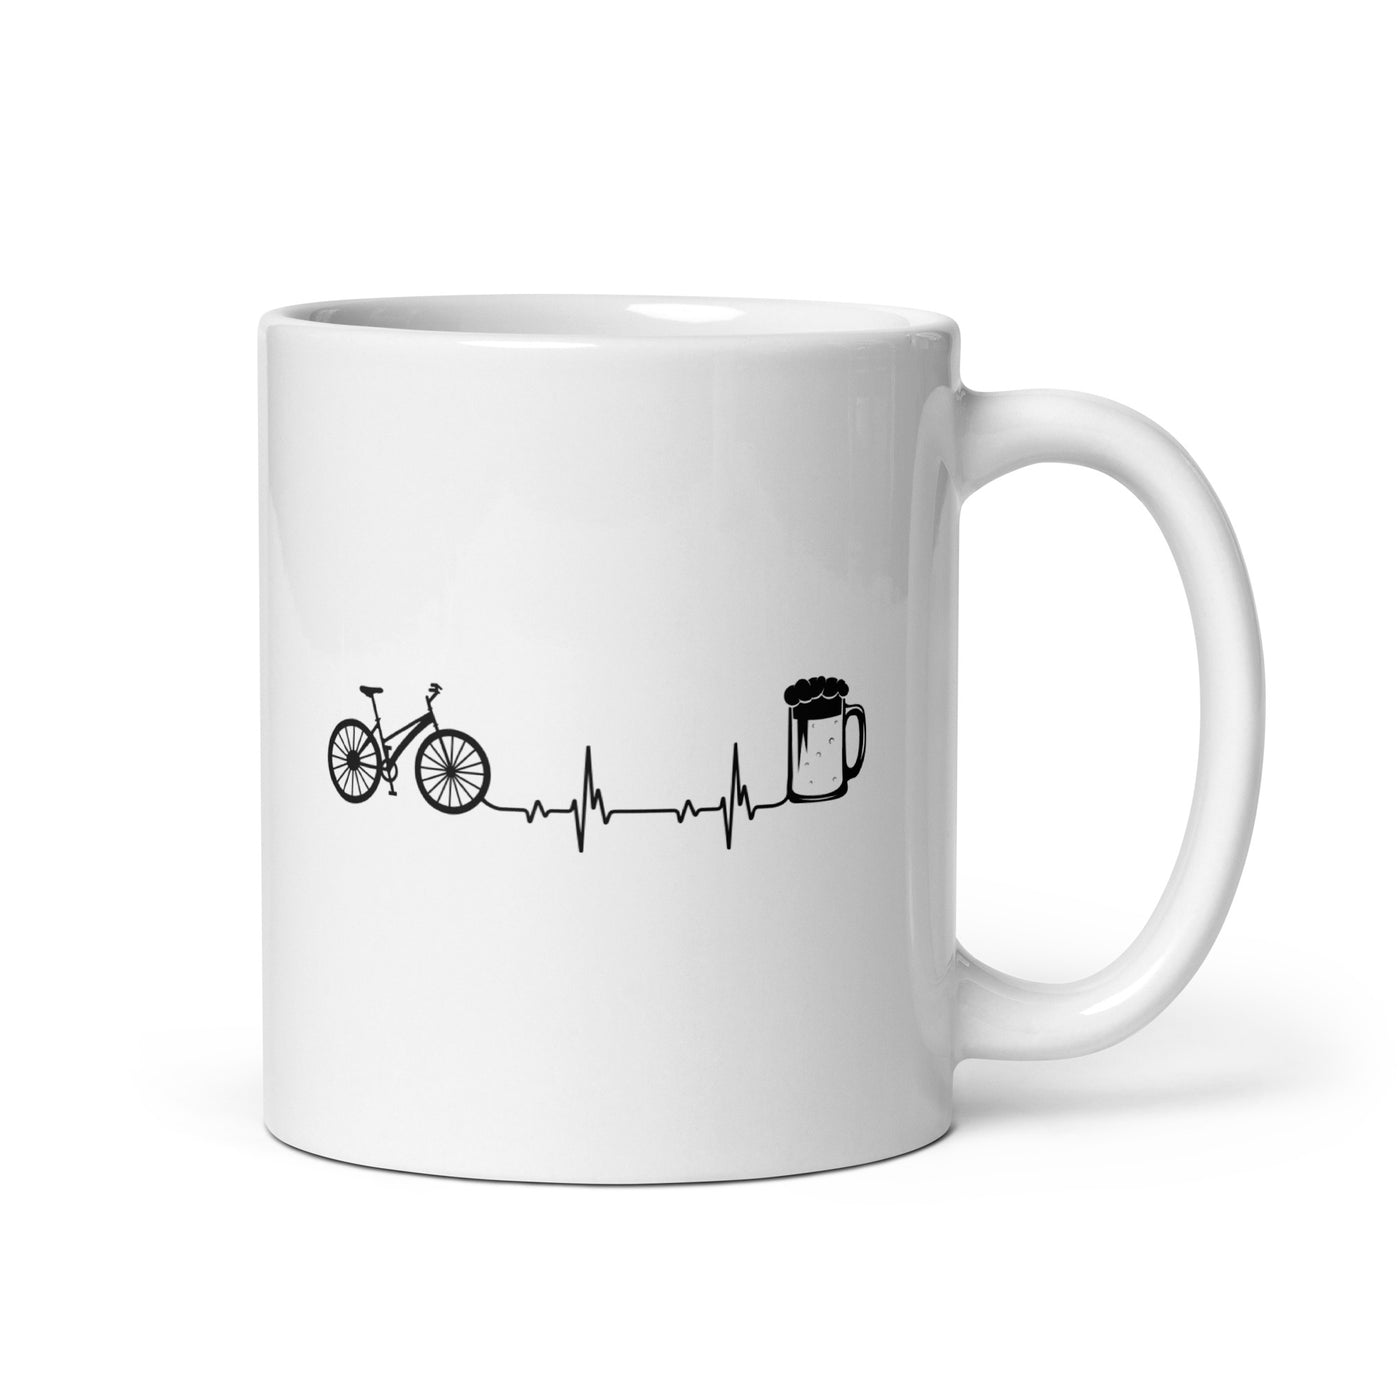 Heartbeat Beer And Bicycle - Tasse fahrrad